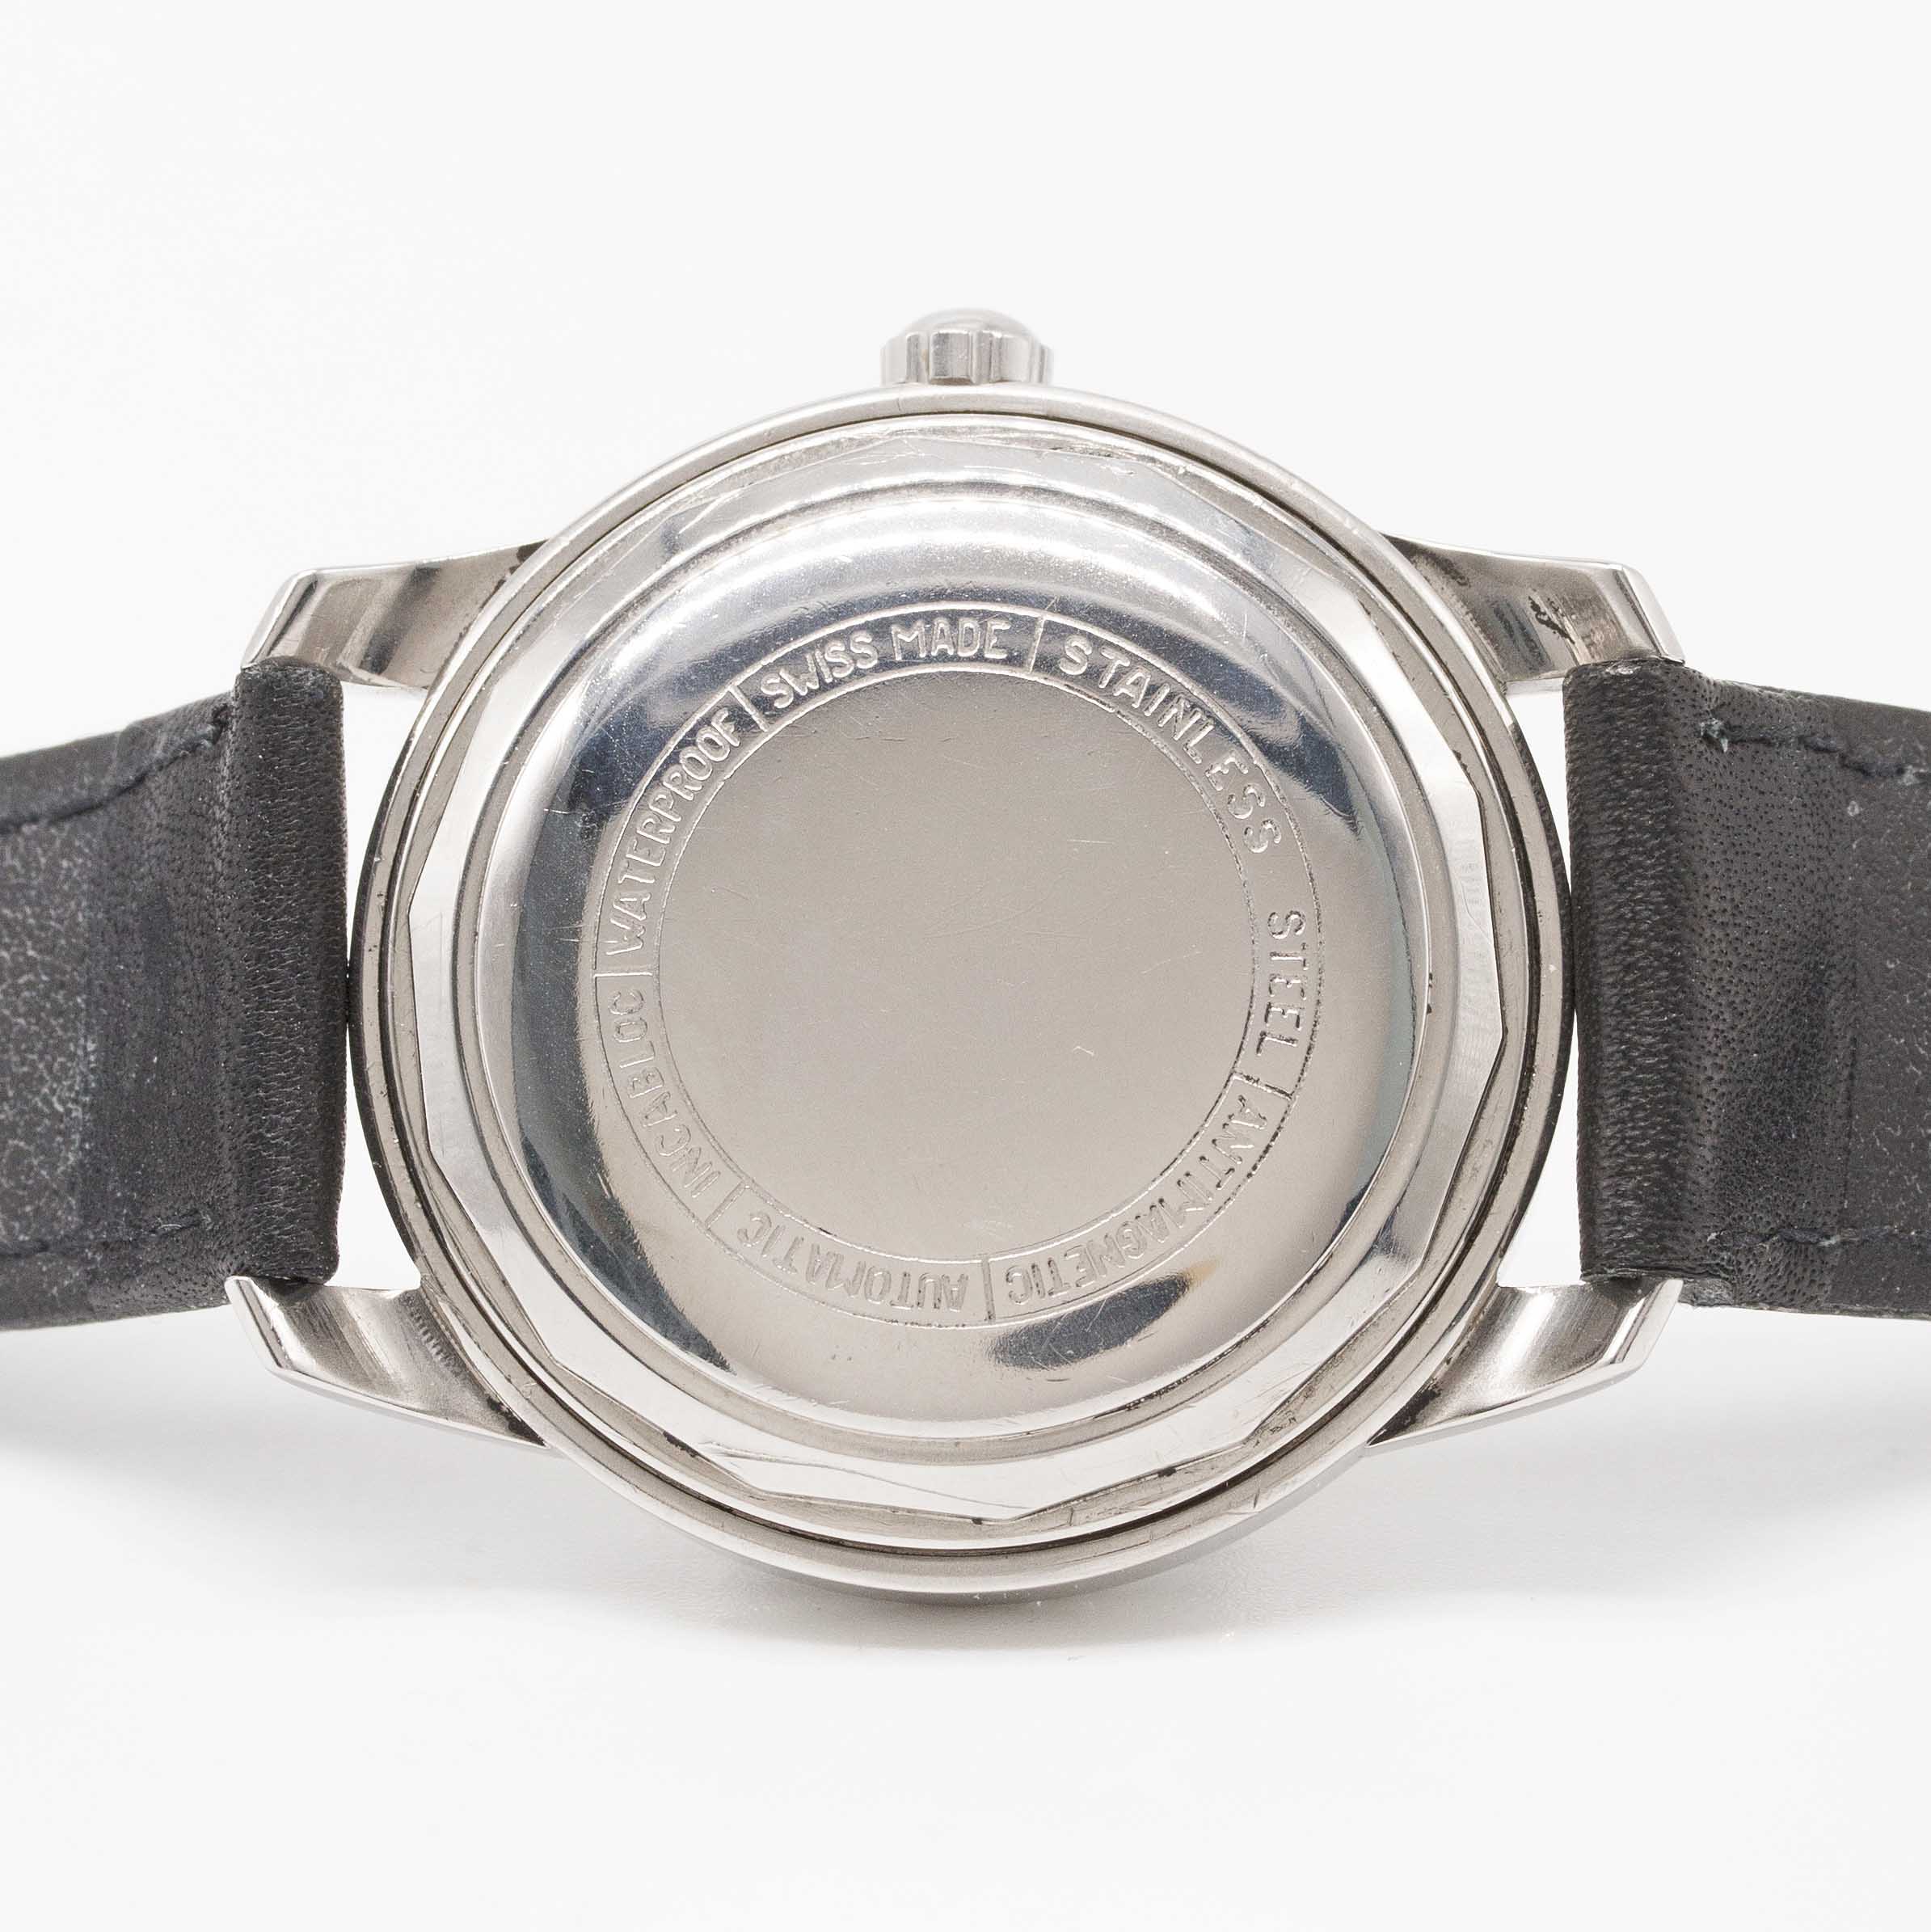 A GENTLEMAN'S STAINLESS STEEL LEMANIA AUTOMATIC WRIST WATCH CIRCA 1960s, REF. 288/3 SILVER DIAL WITH - Image 5 of 6